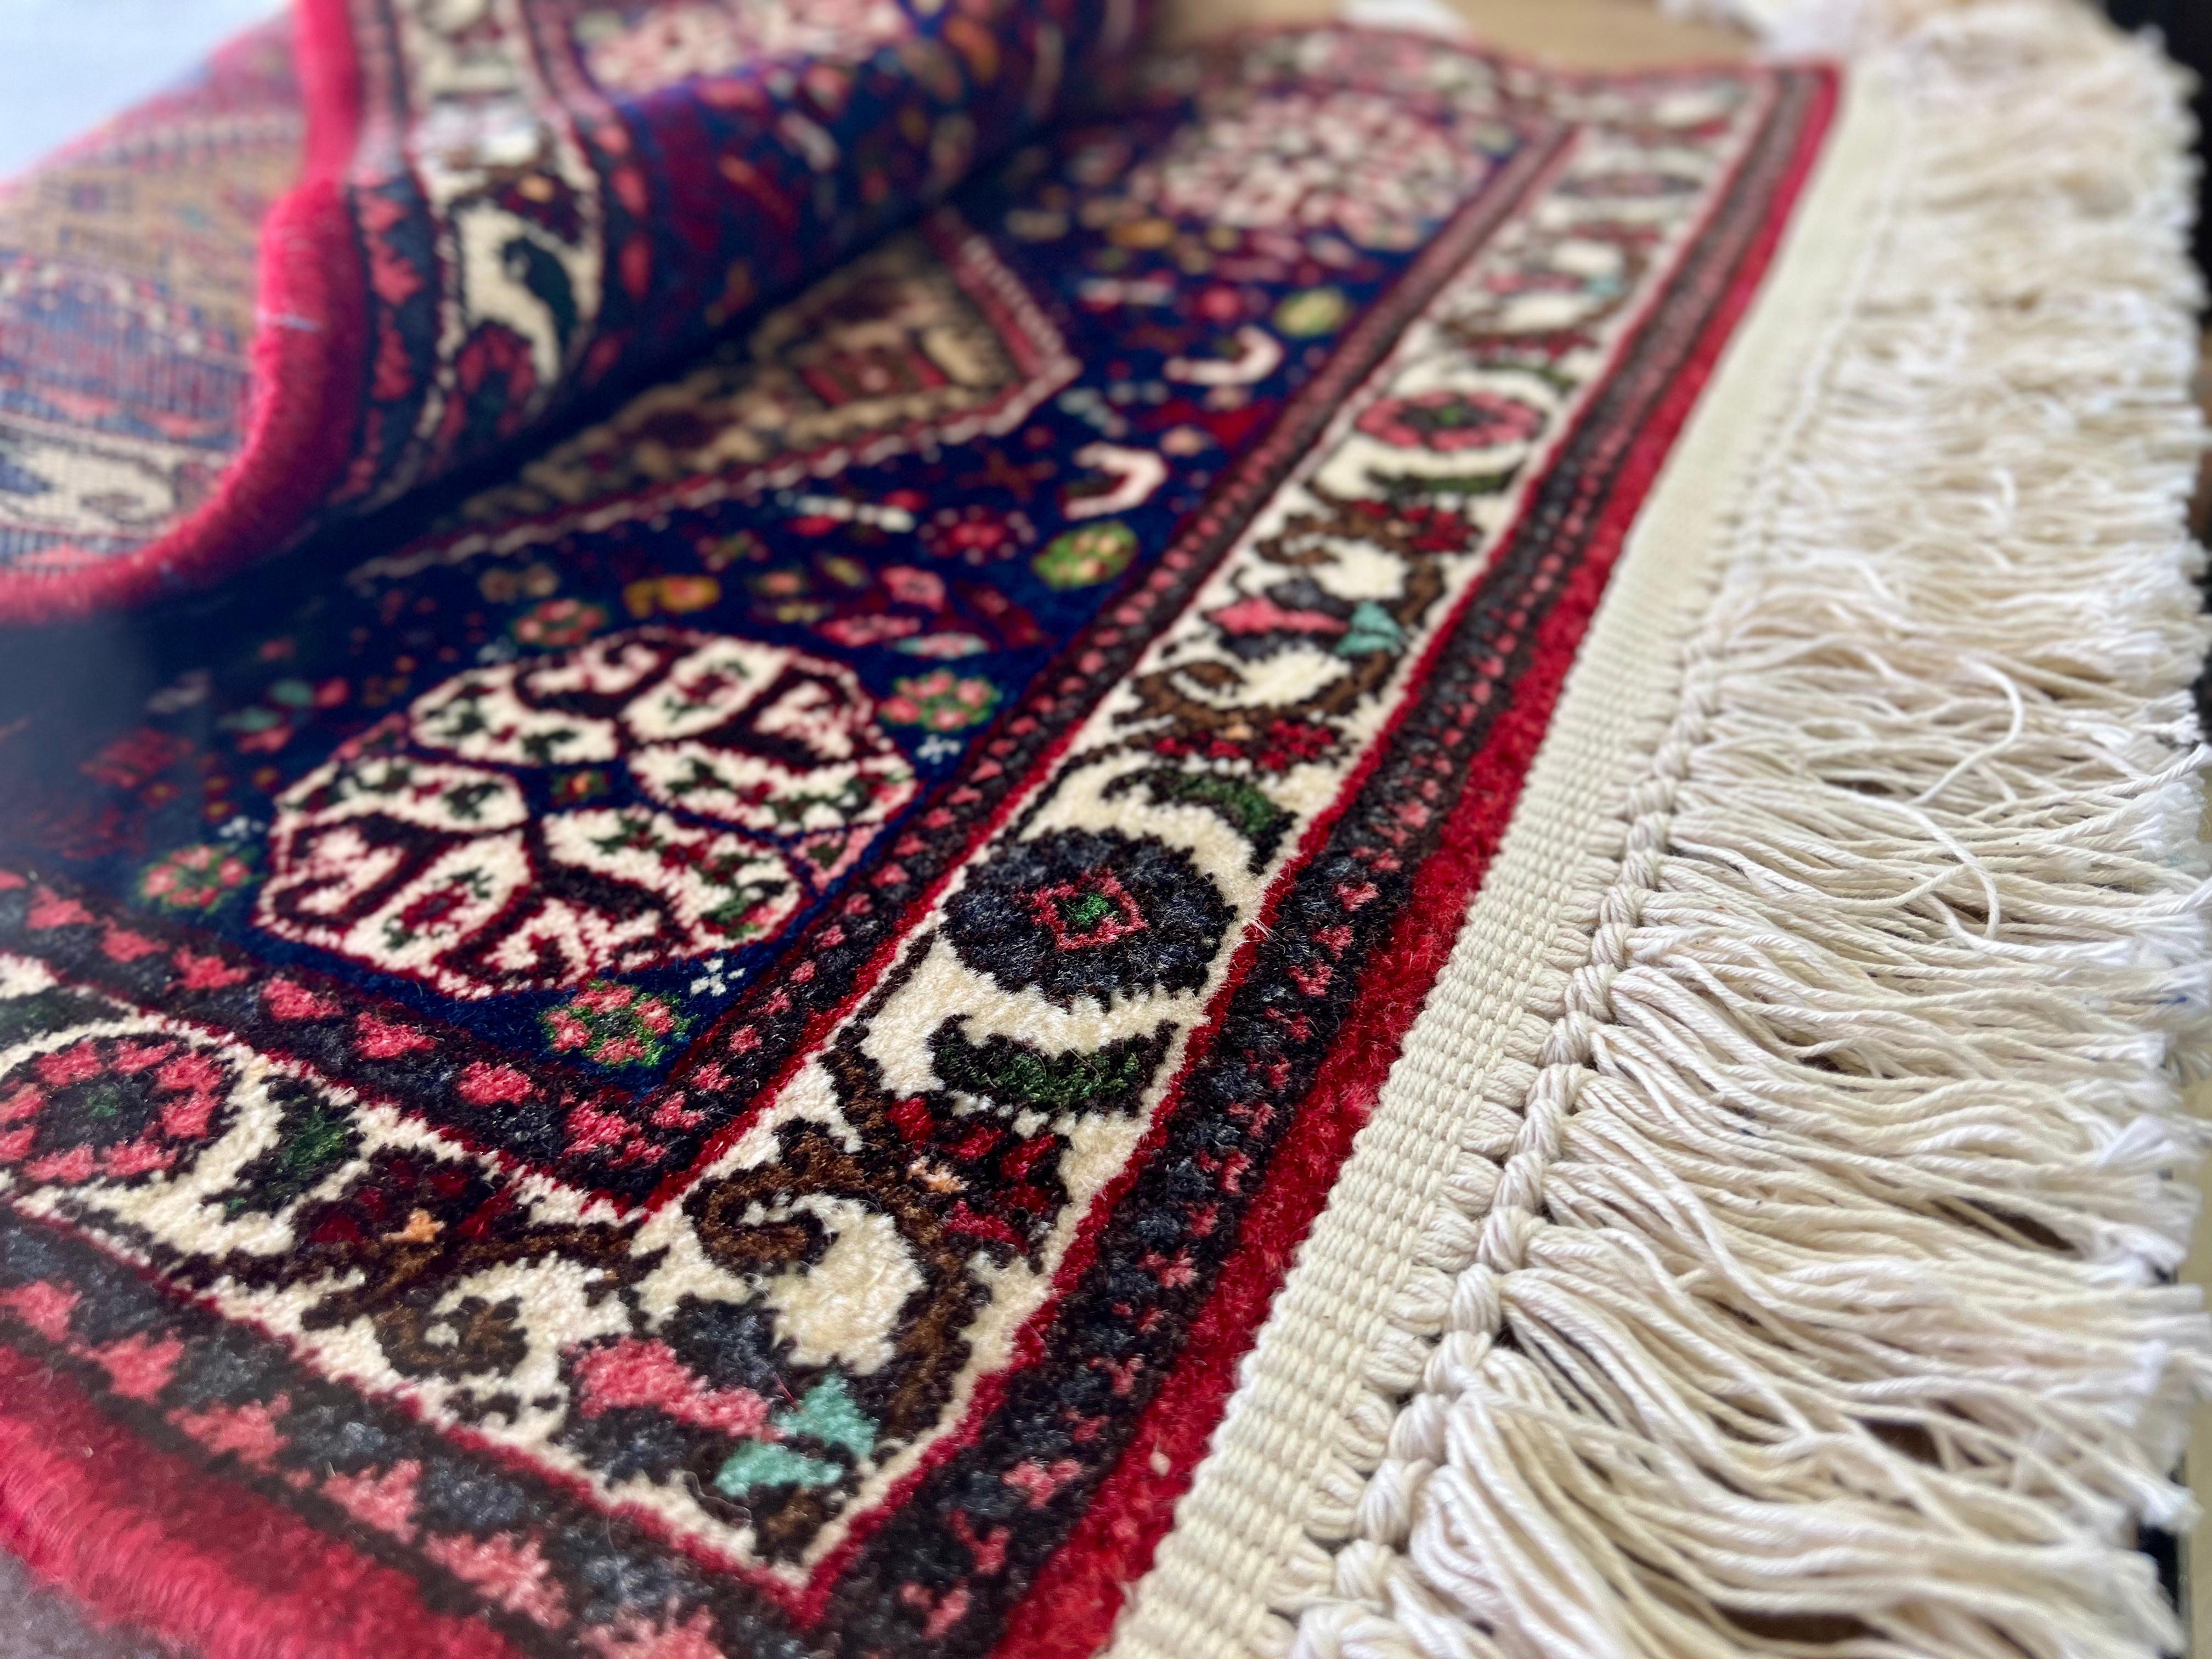 Installation of new cotton fringe on an oriental rug.